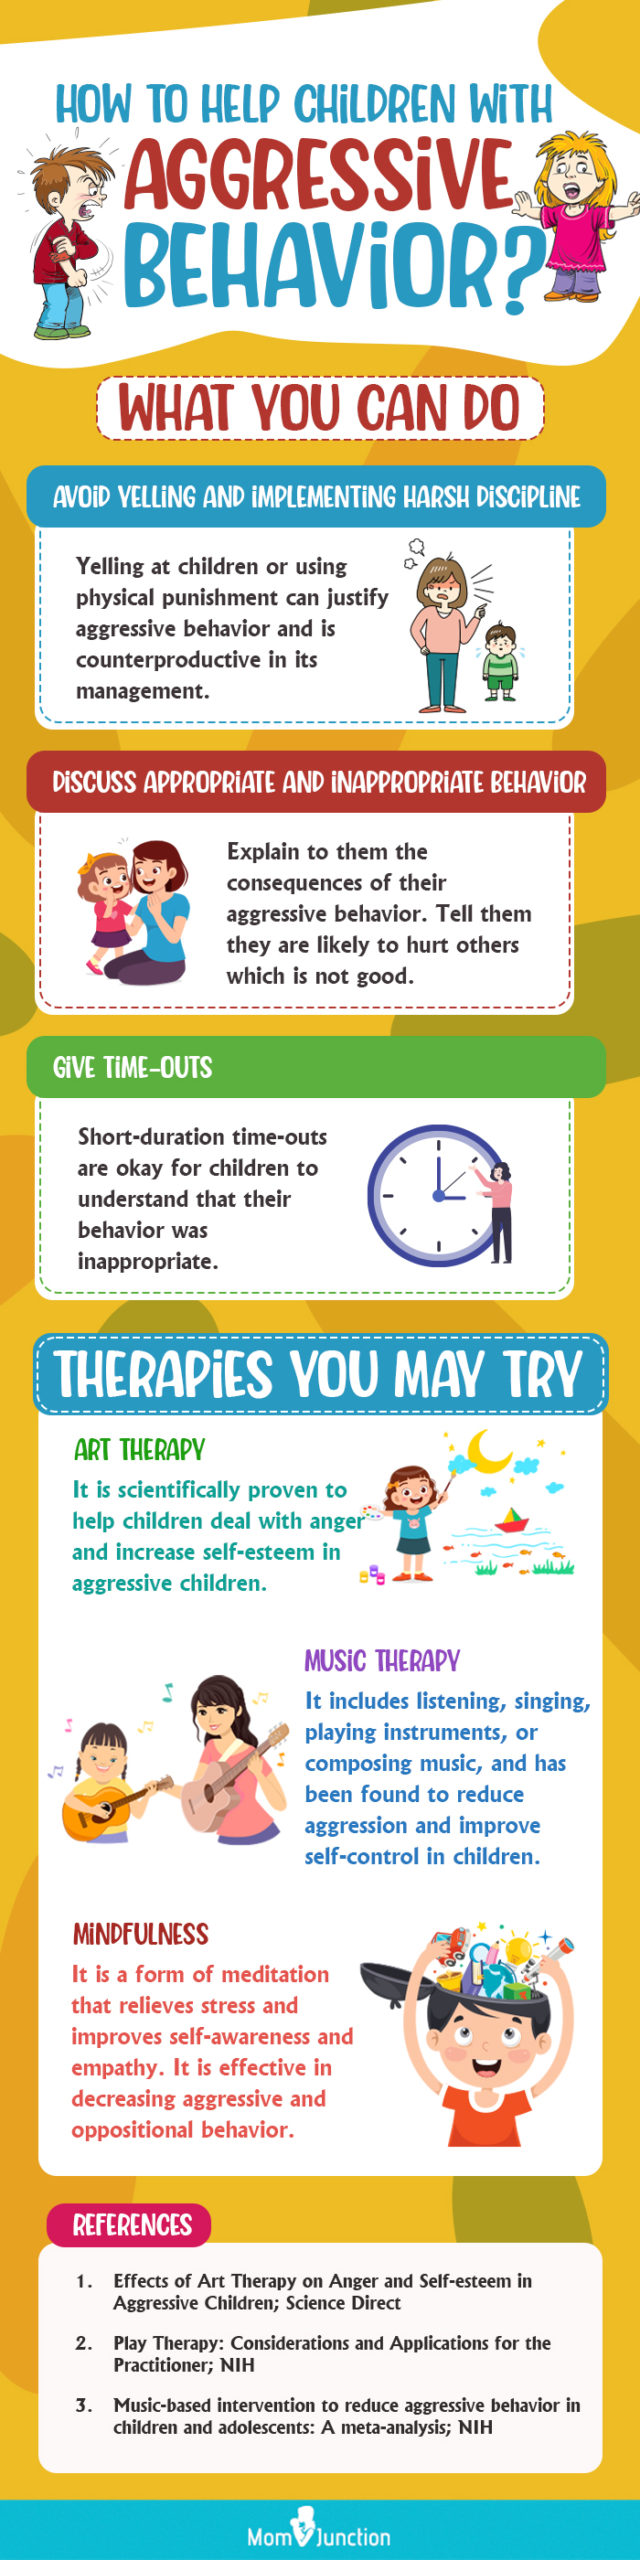 how to help children with aggressive behavior [infographic]